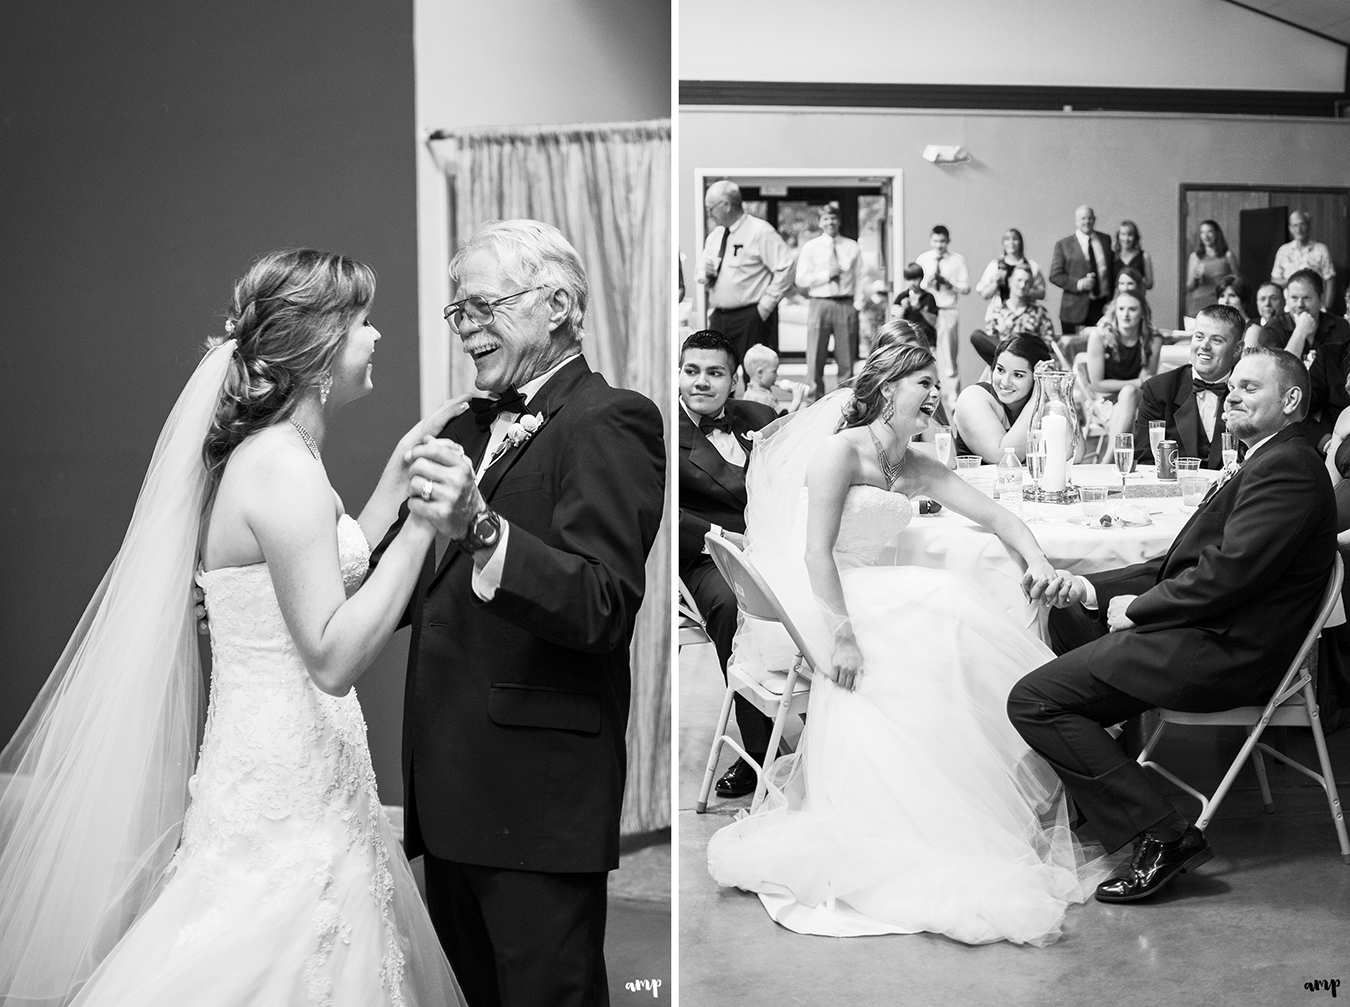 Wedding reception | Father-daughter dance